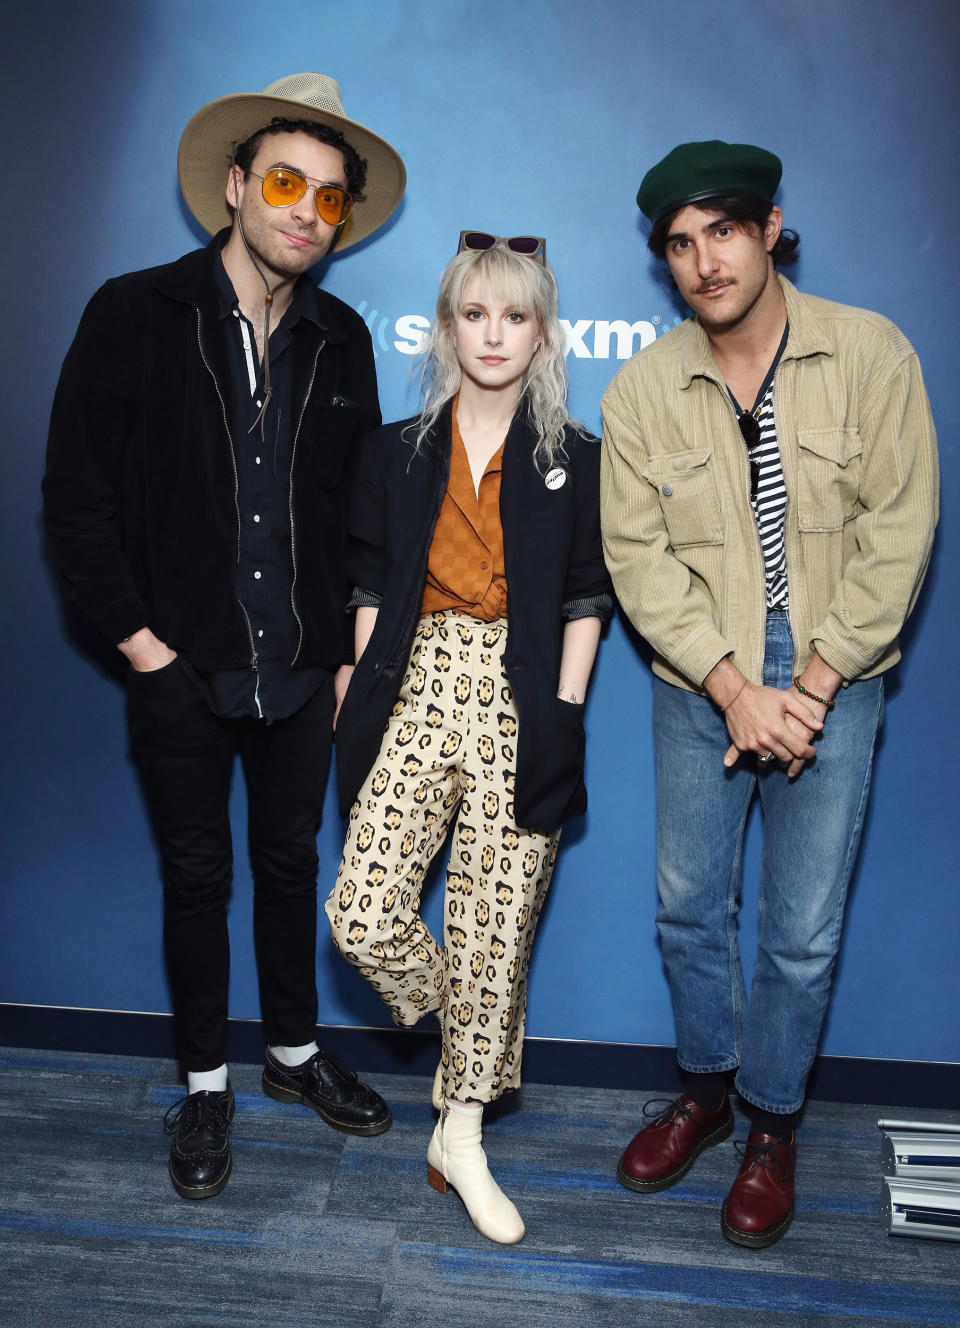 Taylor York, Hayley Williams and Zac Farro of Paramore (Robin Marchant / Getty Images)